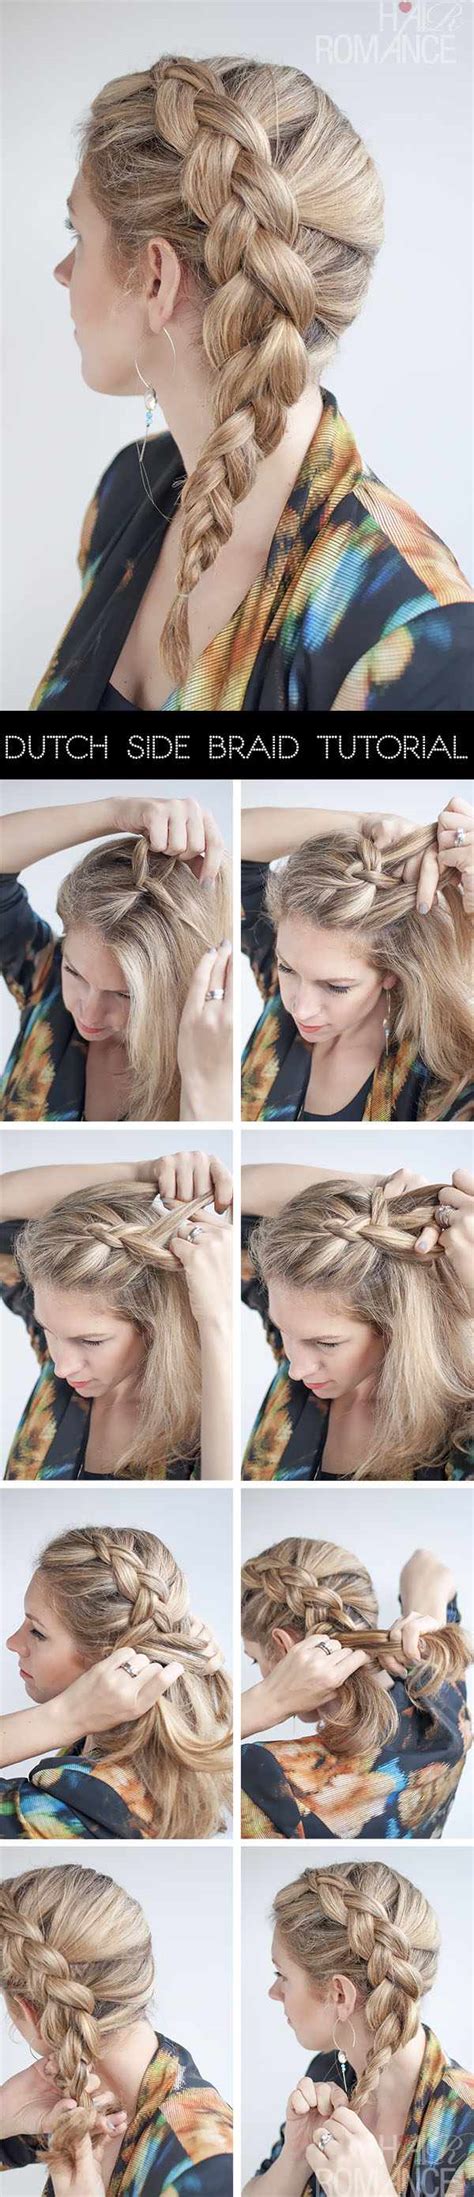 10 snazzy braid hairstyle tutorials every girl should know